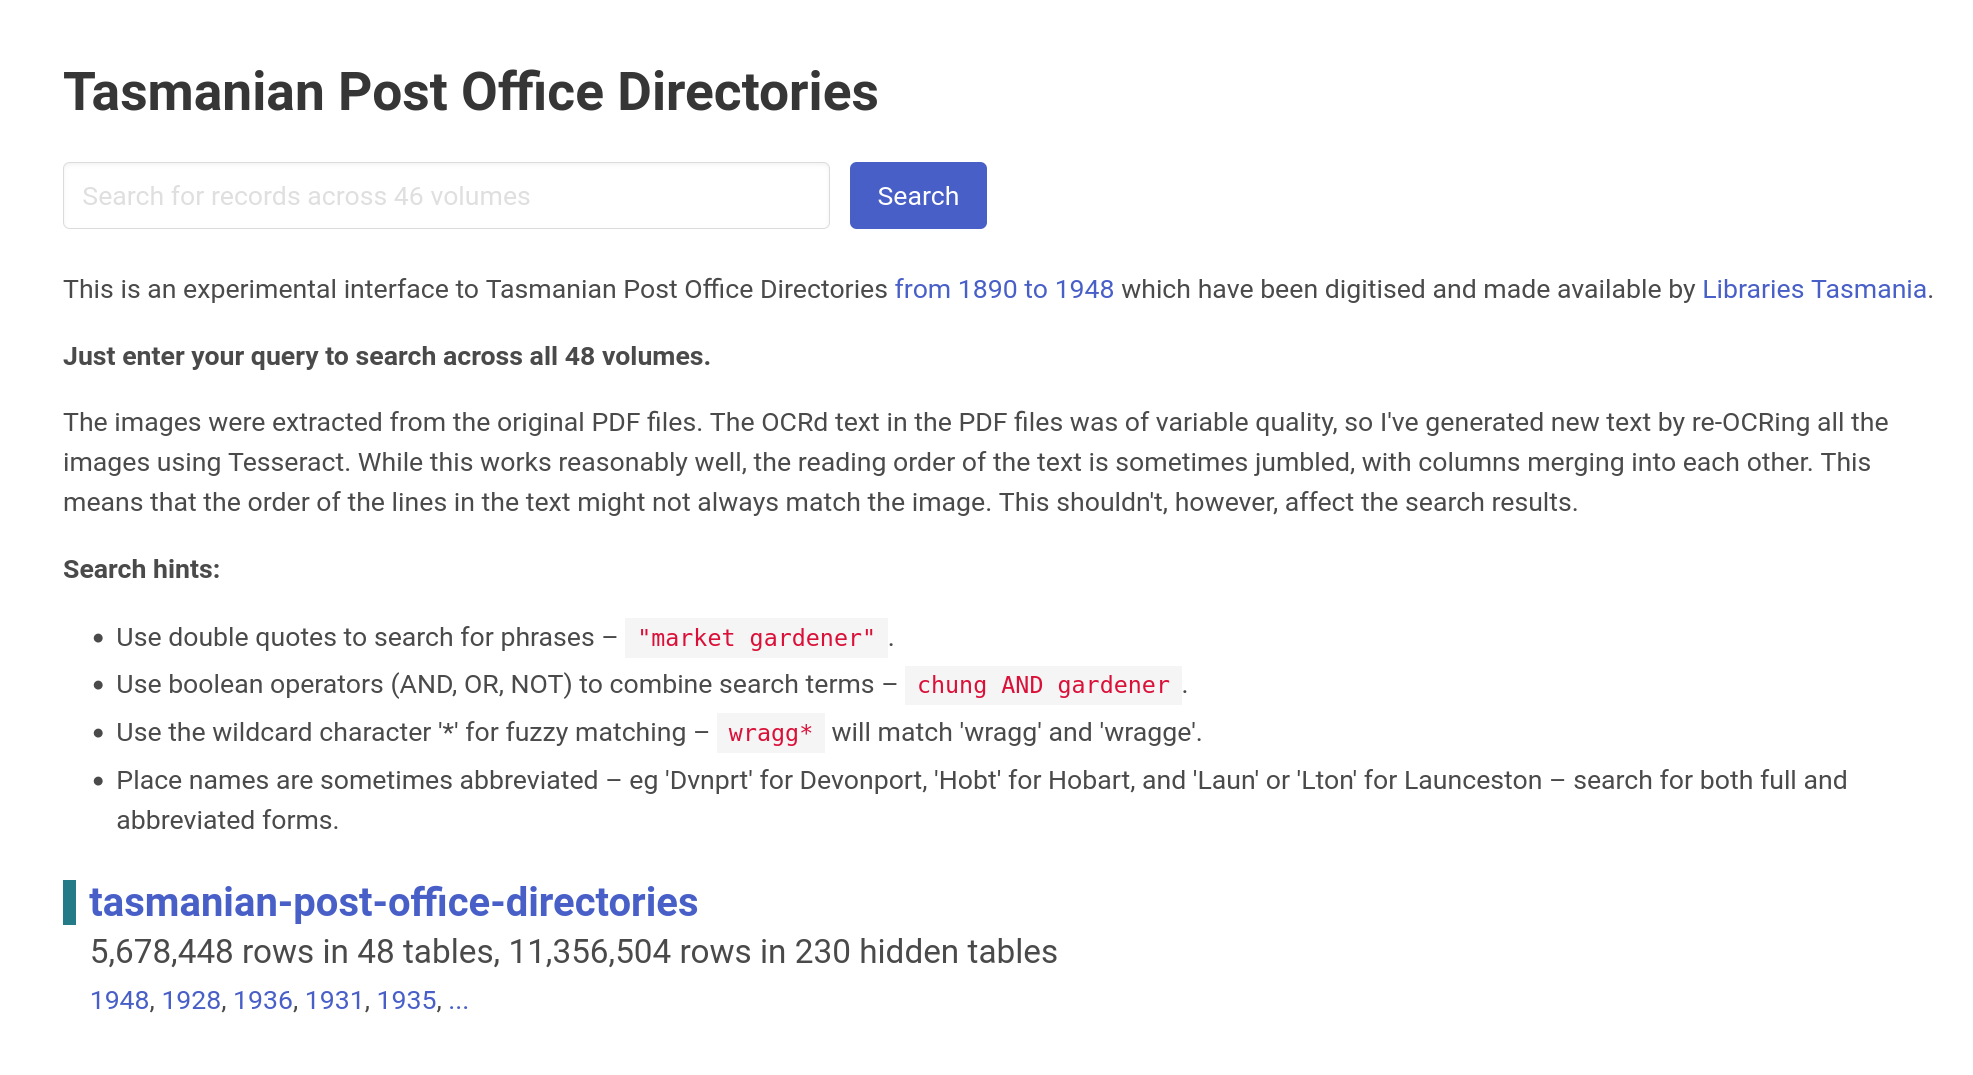 Screenshot of the search screen for Tasmanian Post Office Directories.